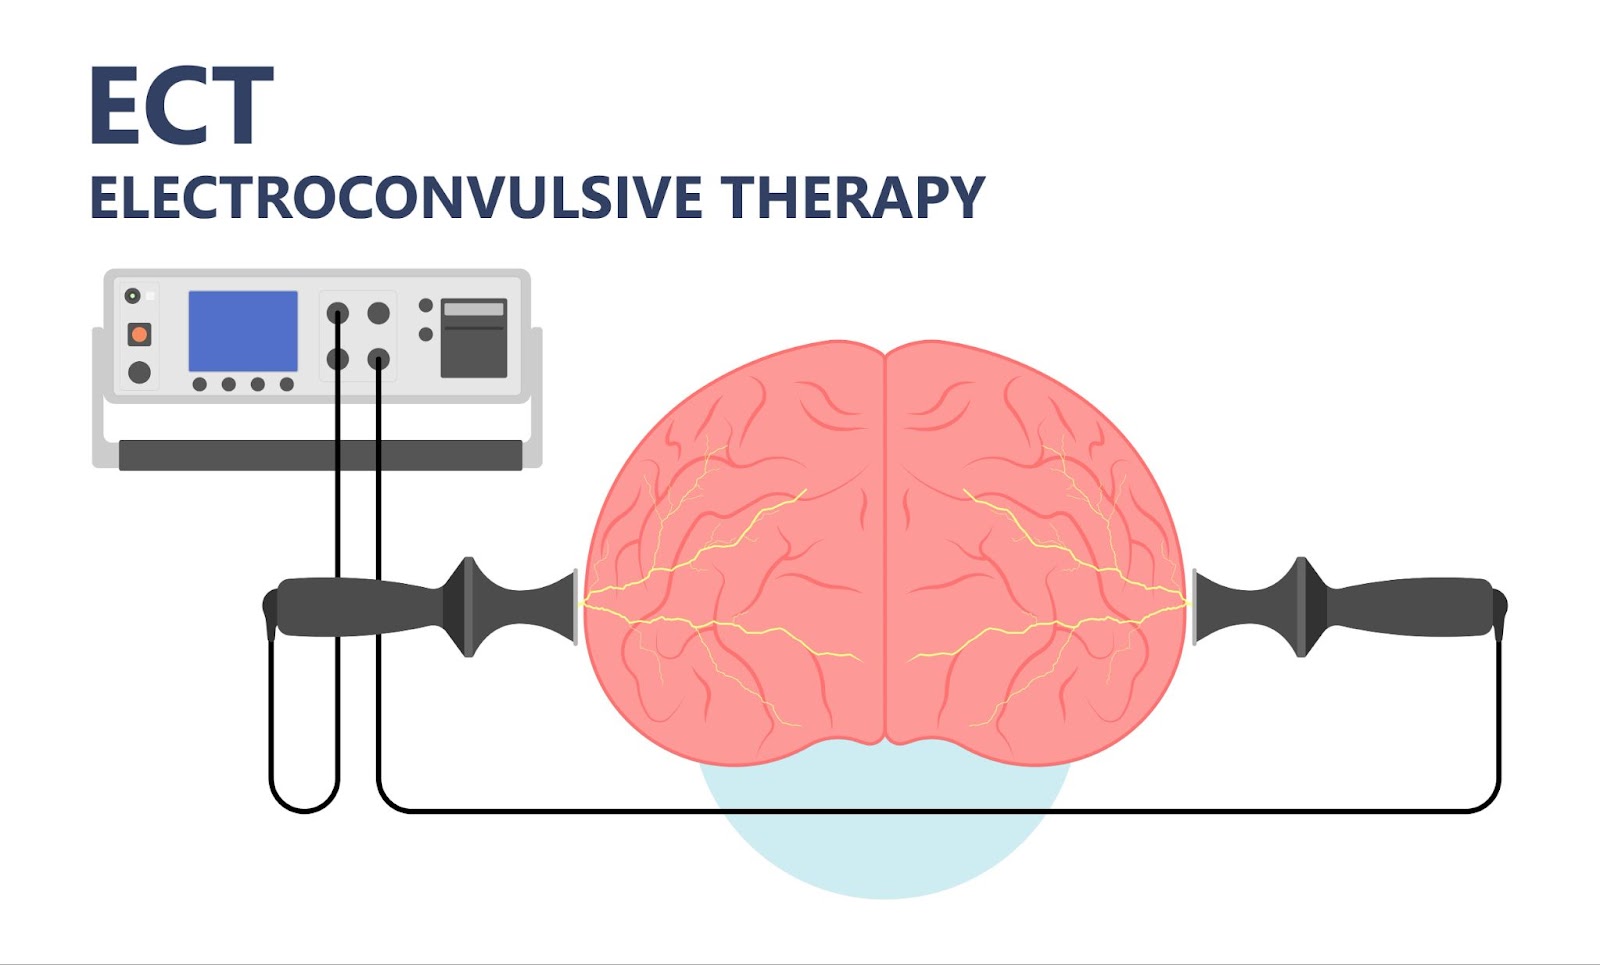 A visual representation of electroconvulsive therapy, a treatment method for various mental health conditions